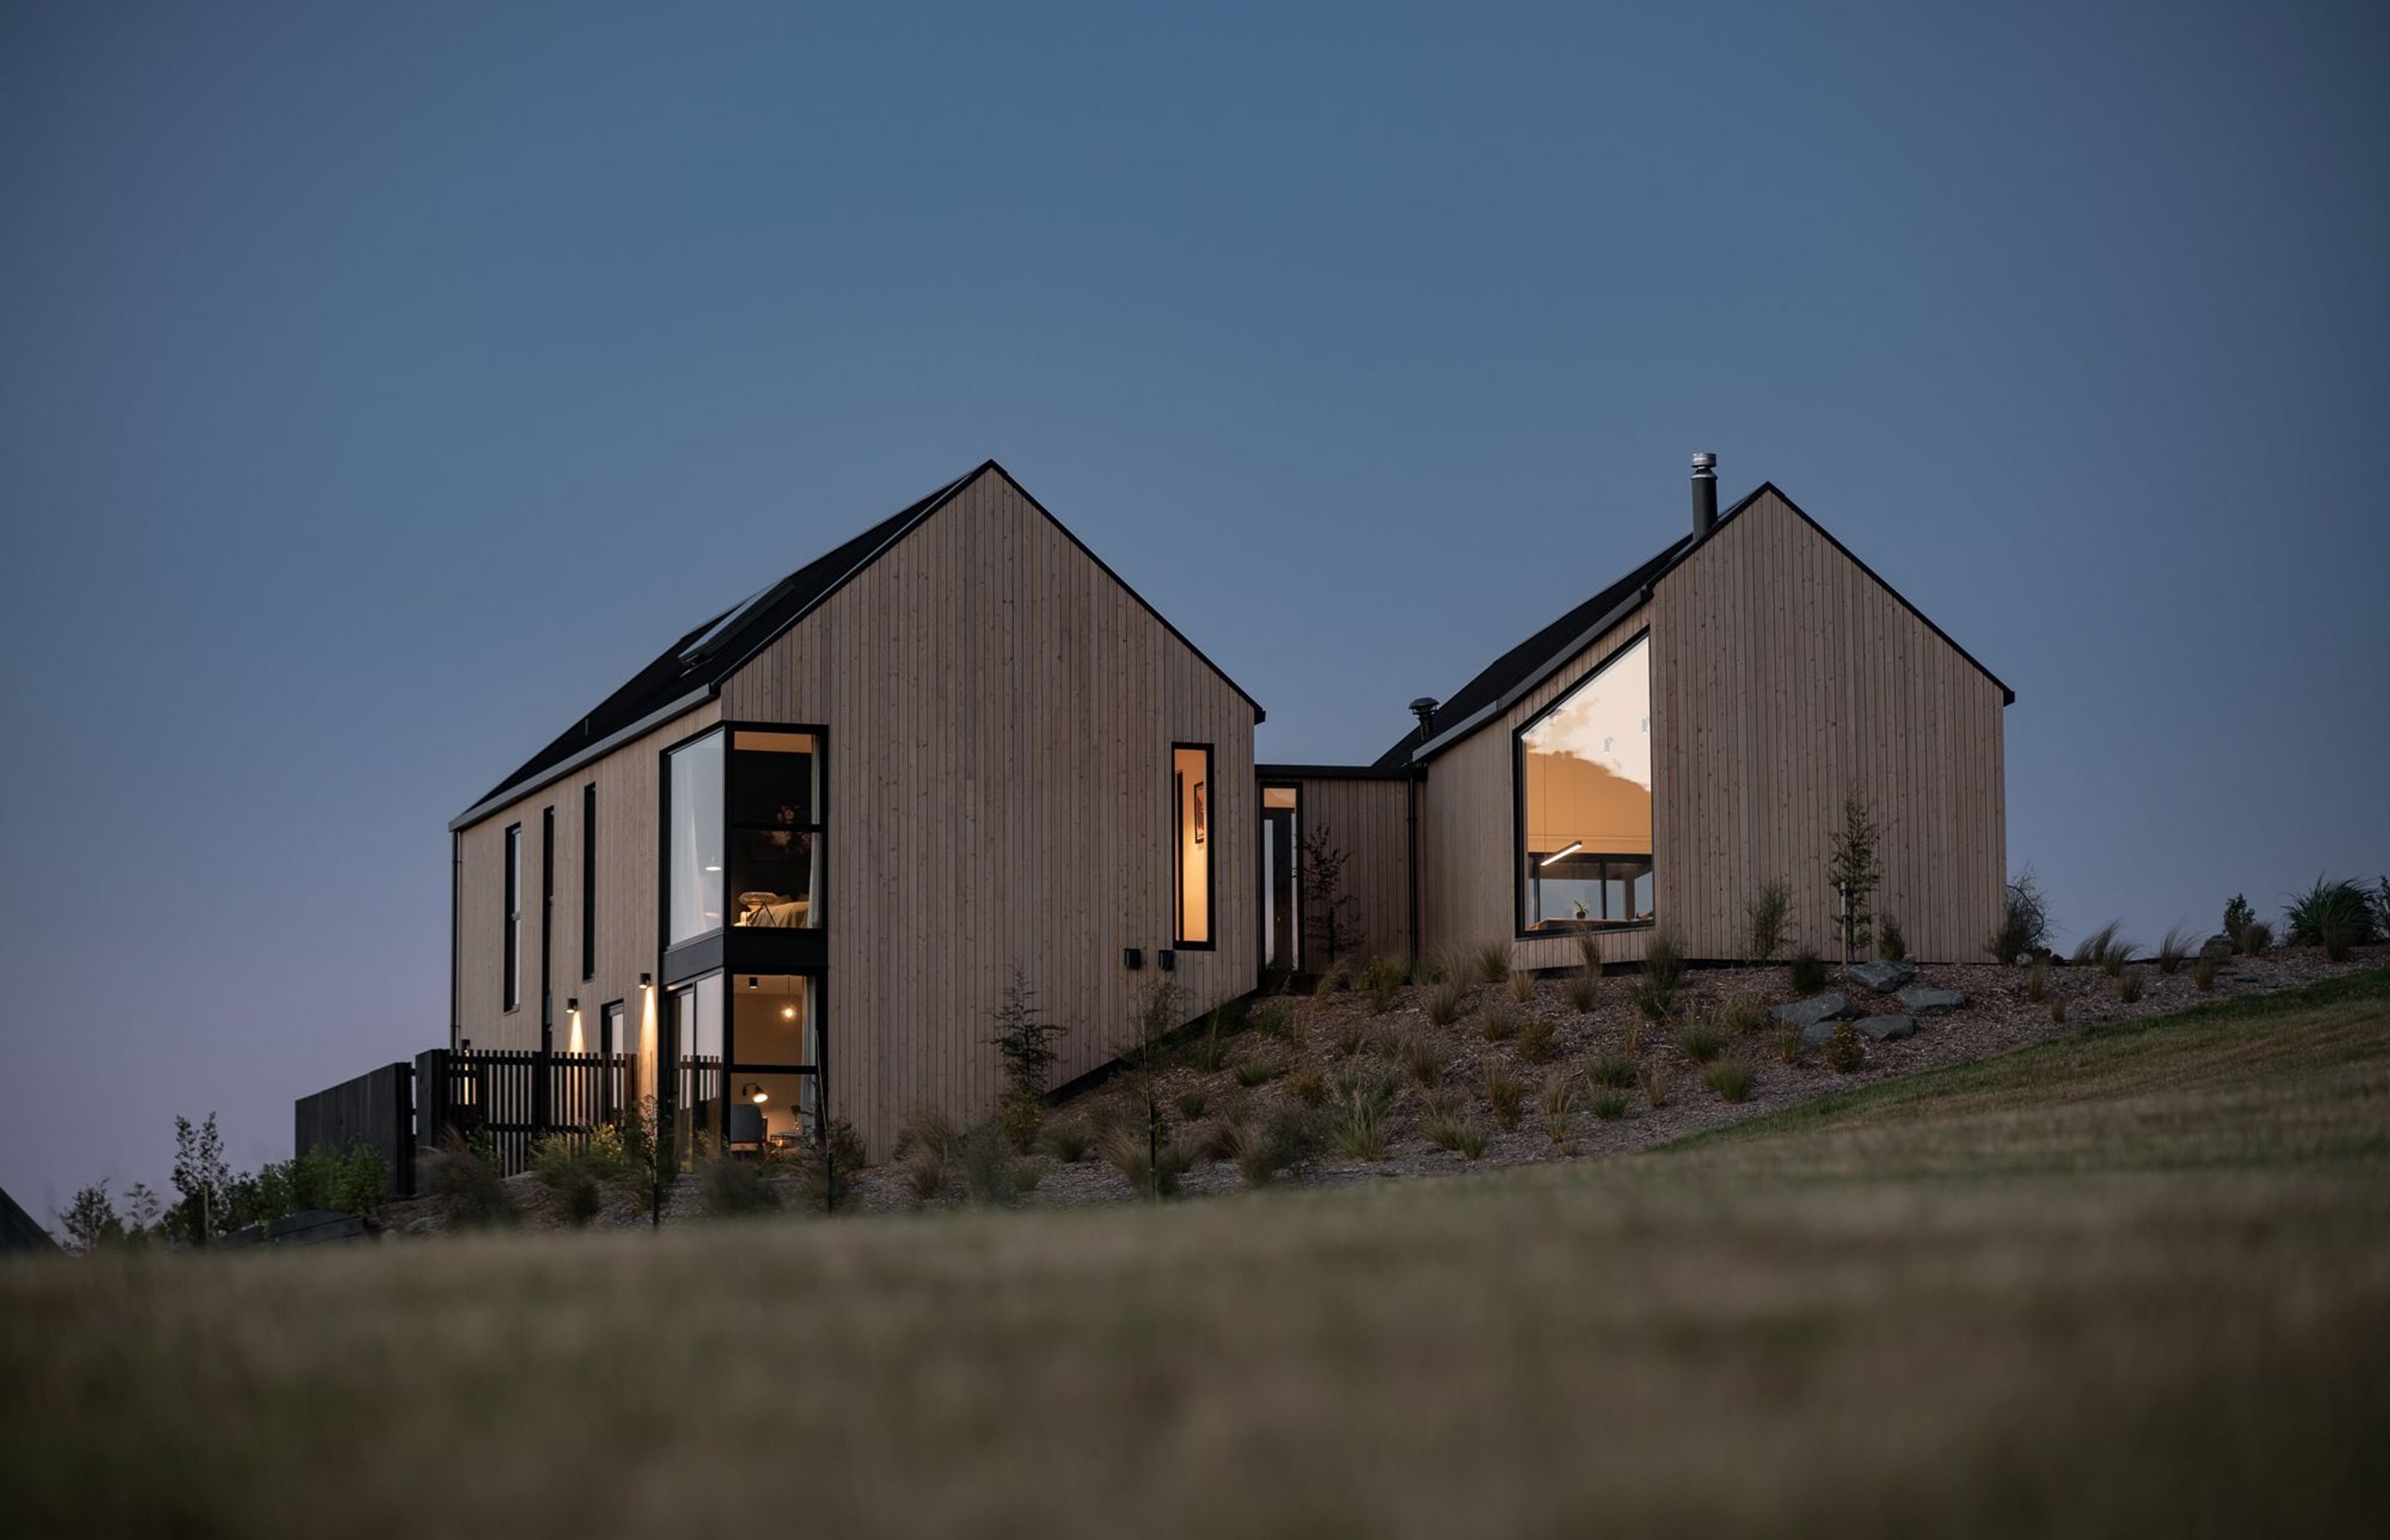 At dusk, the home takes on the same hues as the landscape.